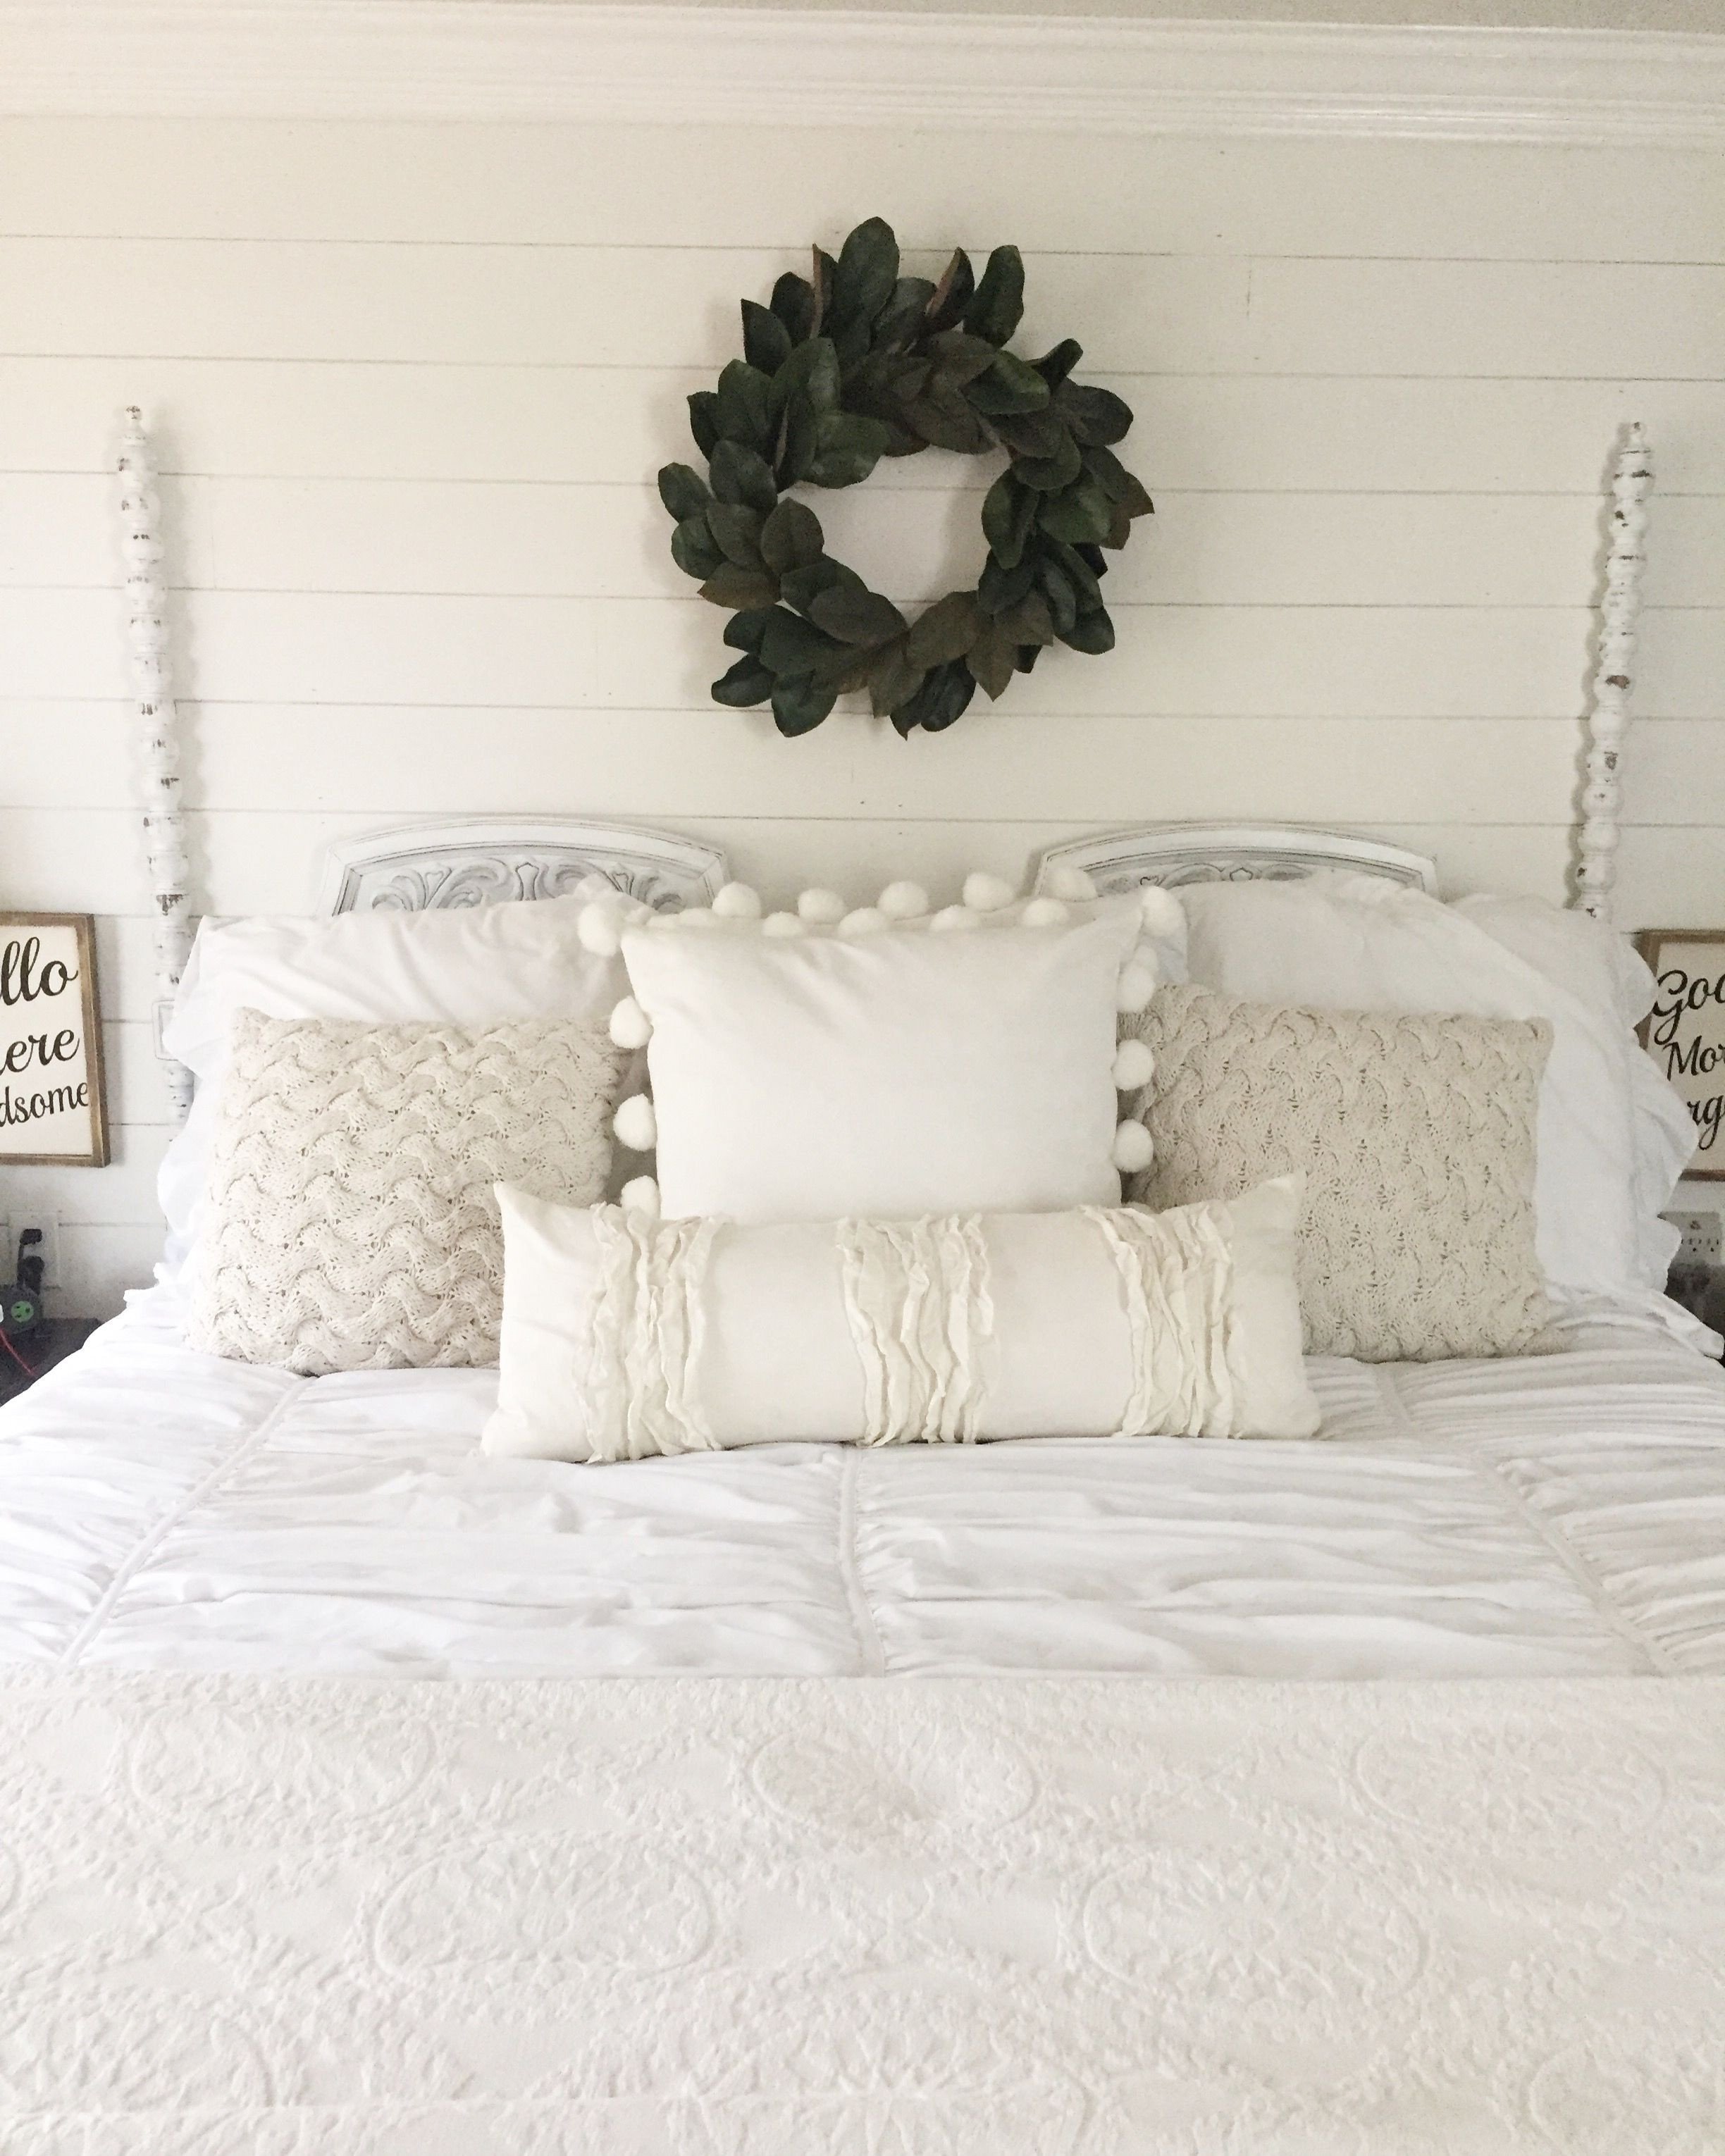 Off White Bedroom Furniture Fresh My Master Bedroom Walls Were Shiplapped and Painted Sherwin